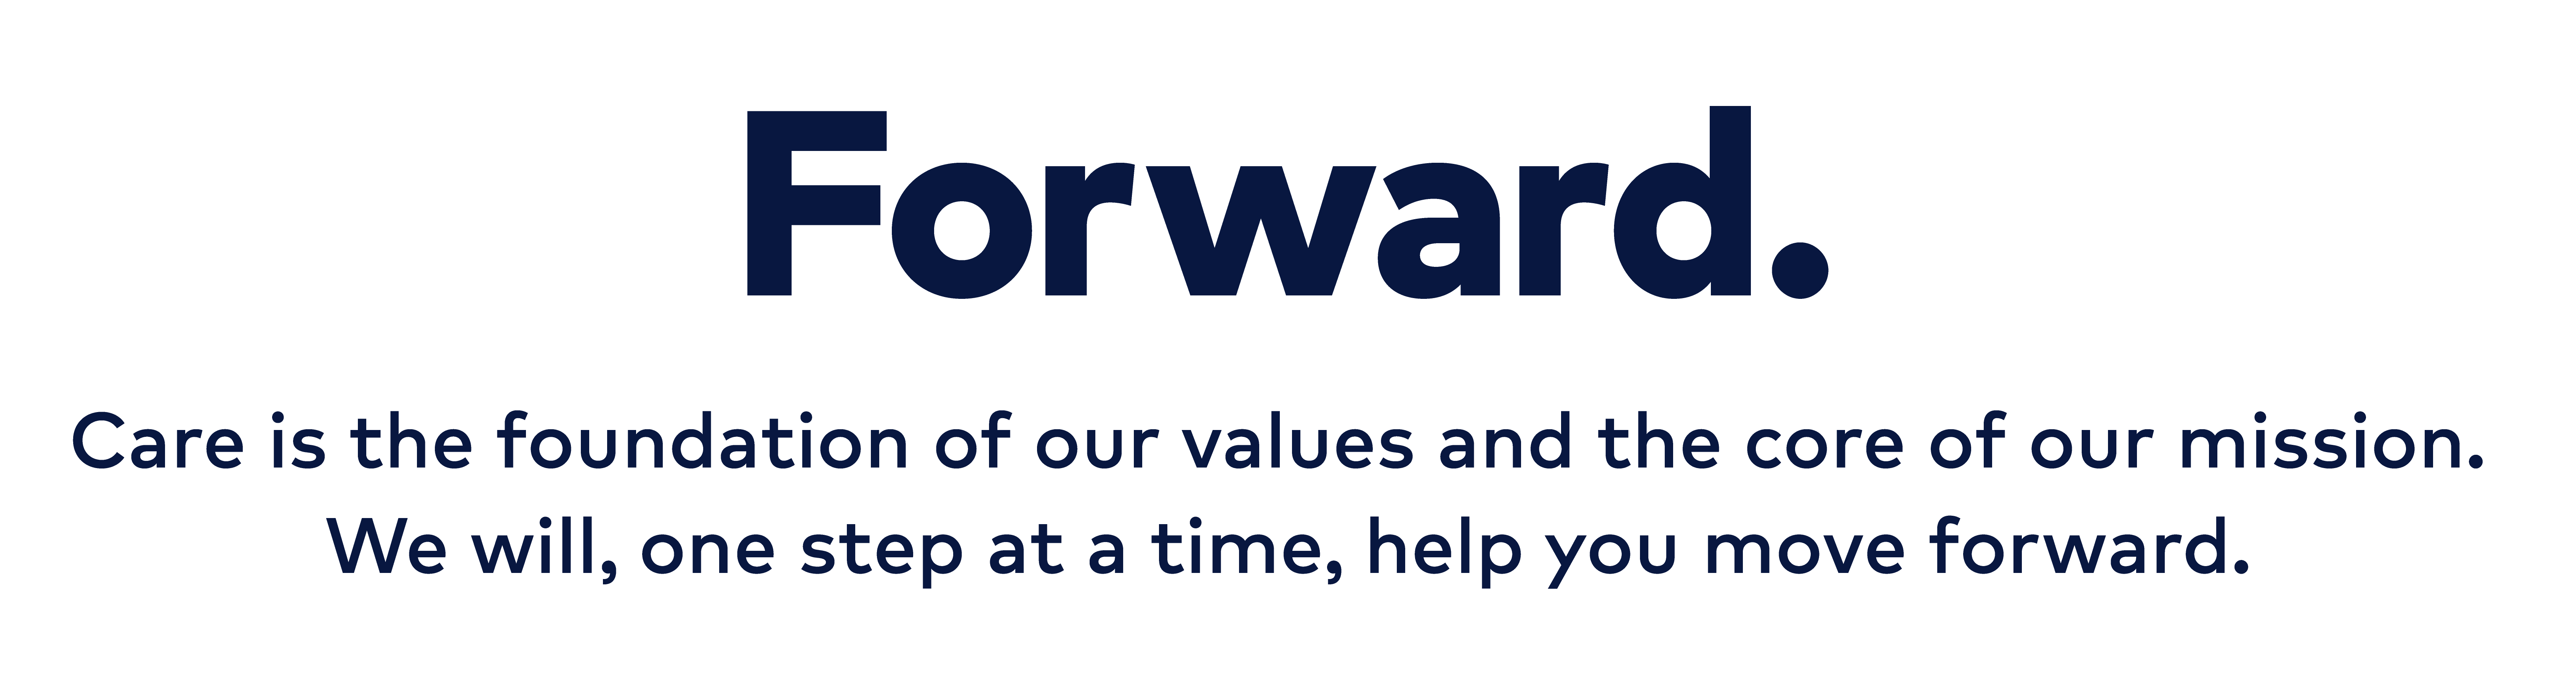 Forward. Care is the foundation of our values and the core of our mission. We will, one step at a time, help you move forward.